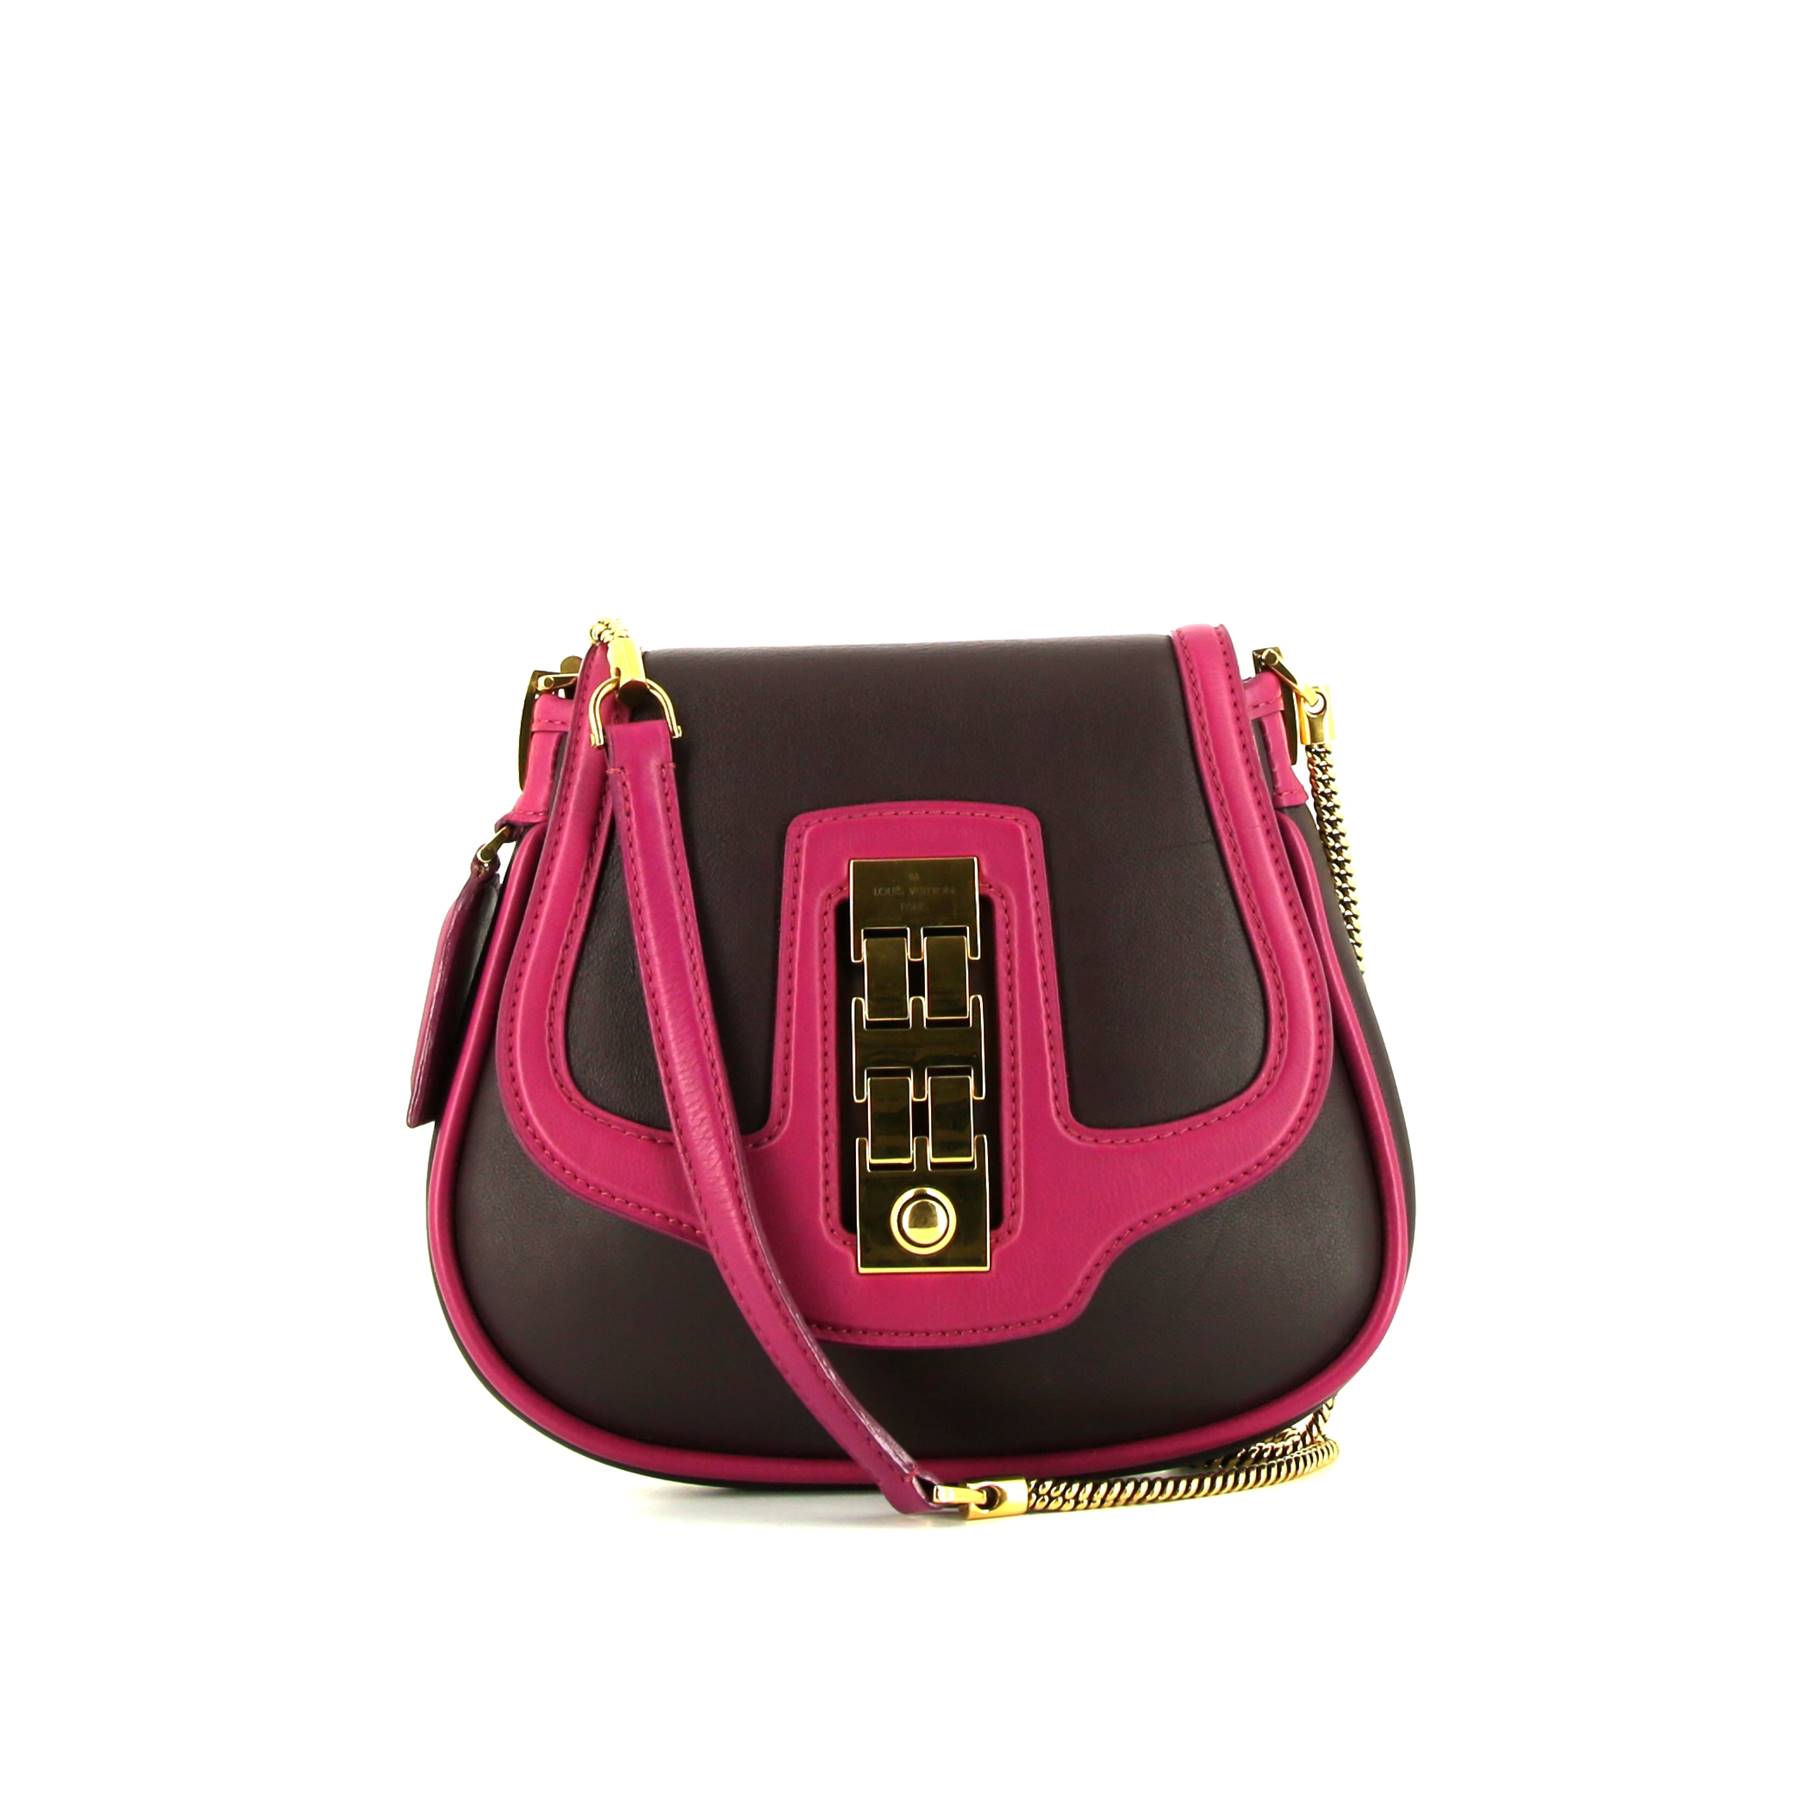 Shoulder Bag In Pink And Leather